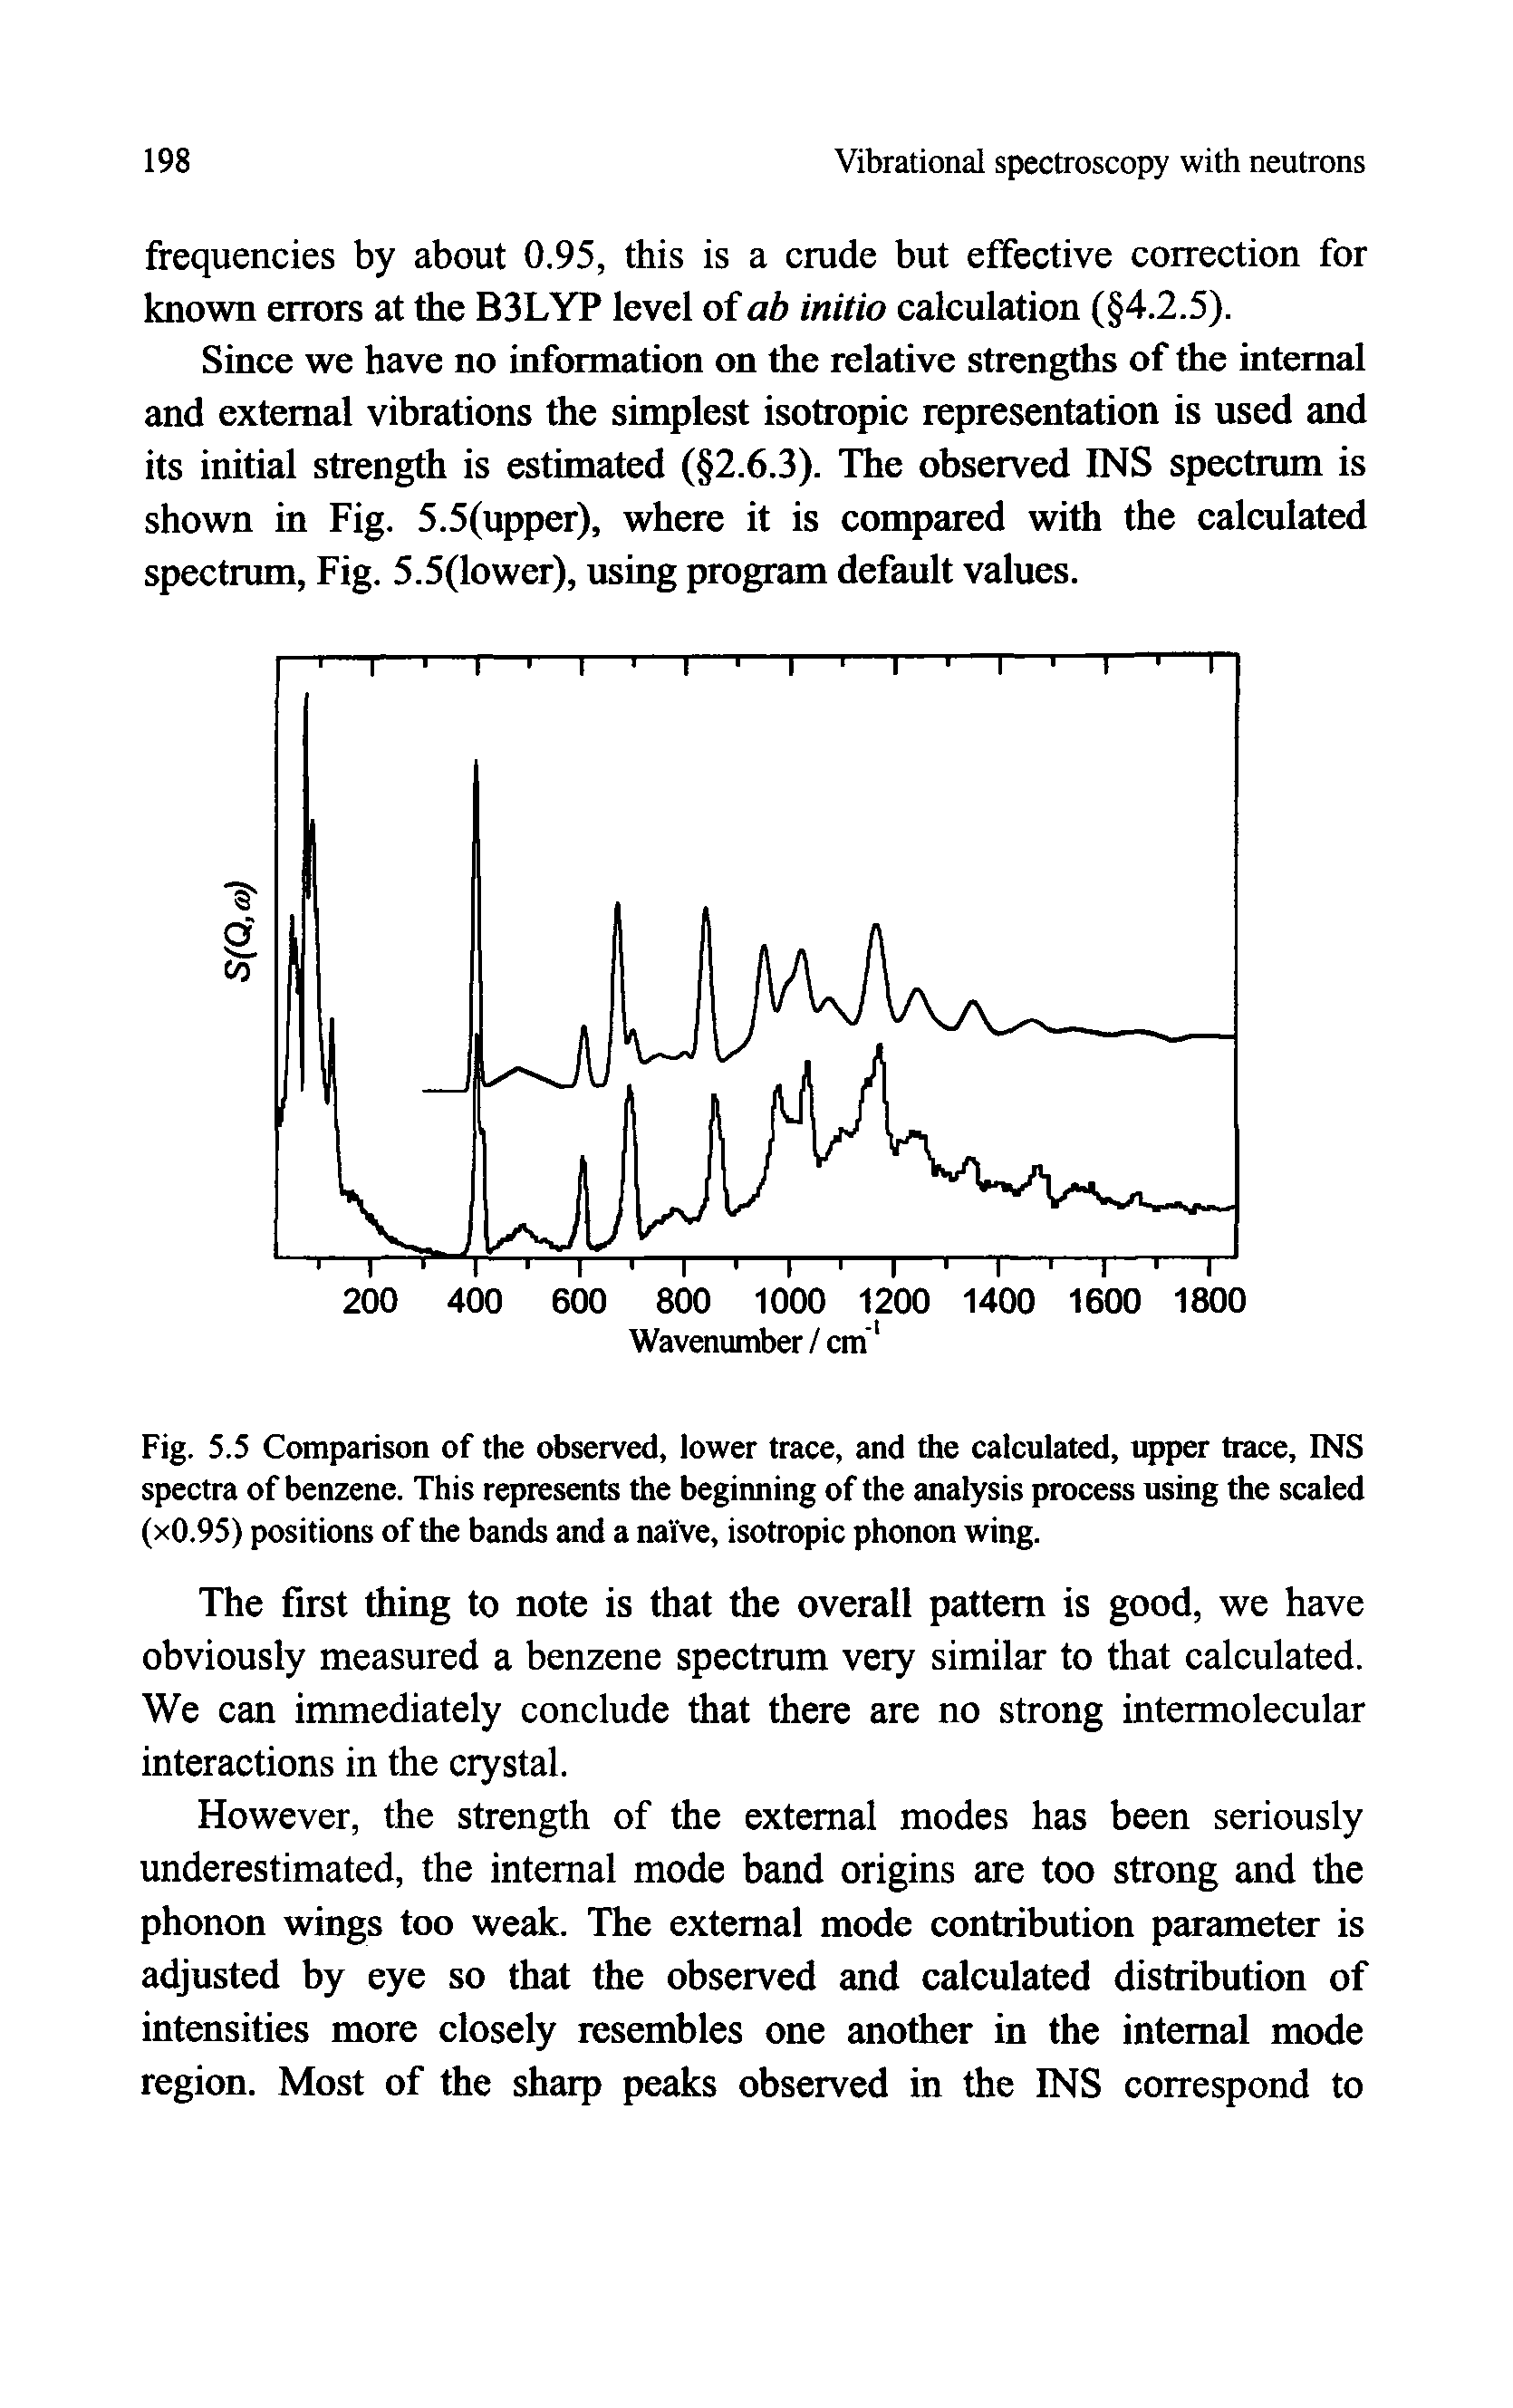 Fig. 5.5 Comparison of the observed, lower trace, and the calculated, upper trace, INS spectra of benzene. This represents the beginning of the analysis process using the scaled (xO.95) positions of the bands and a naive, isotropic phonon wing.